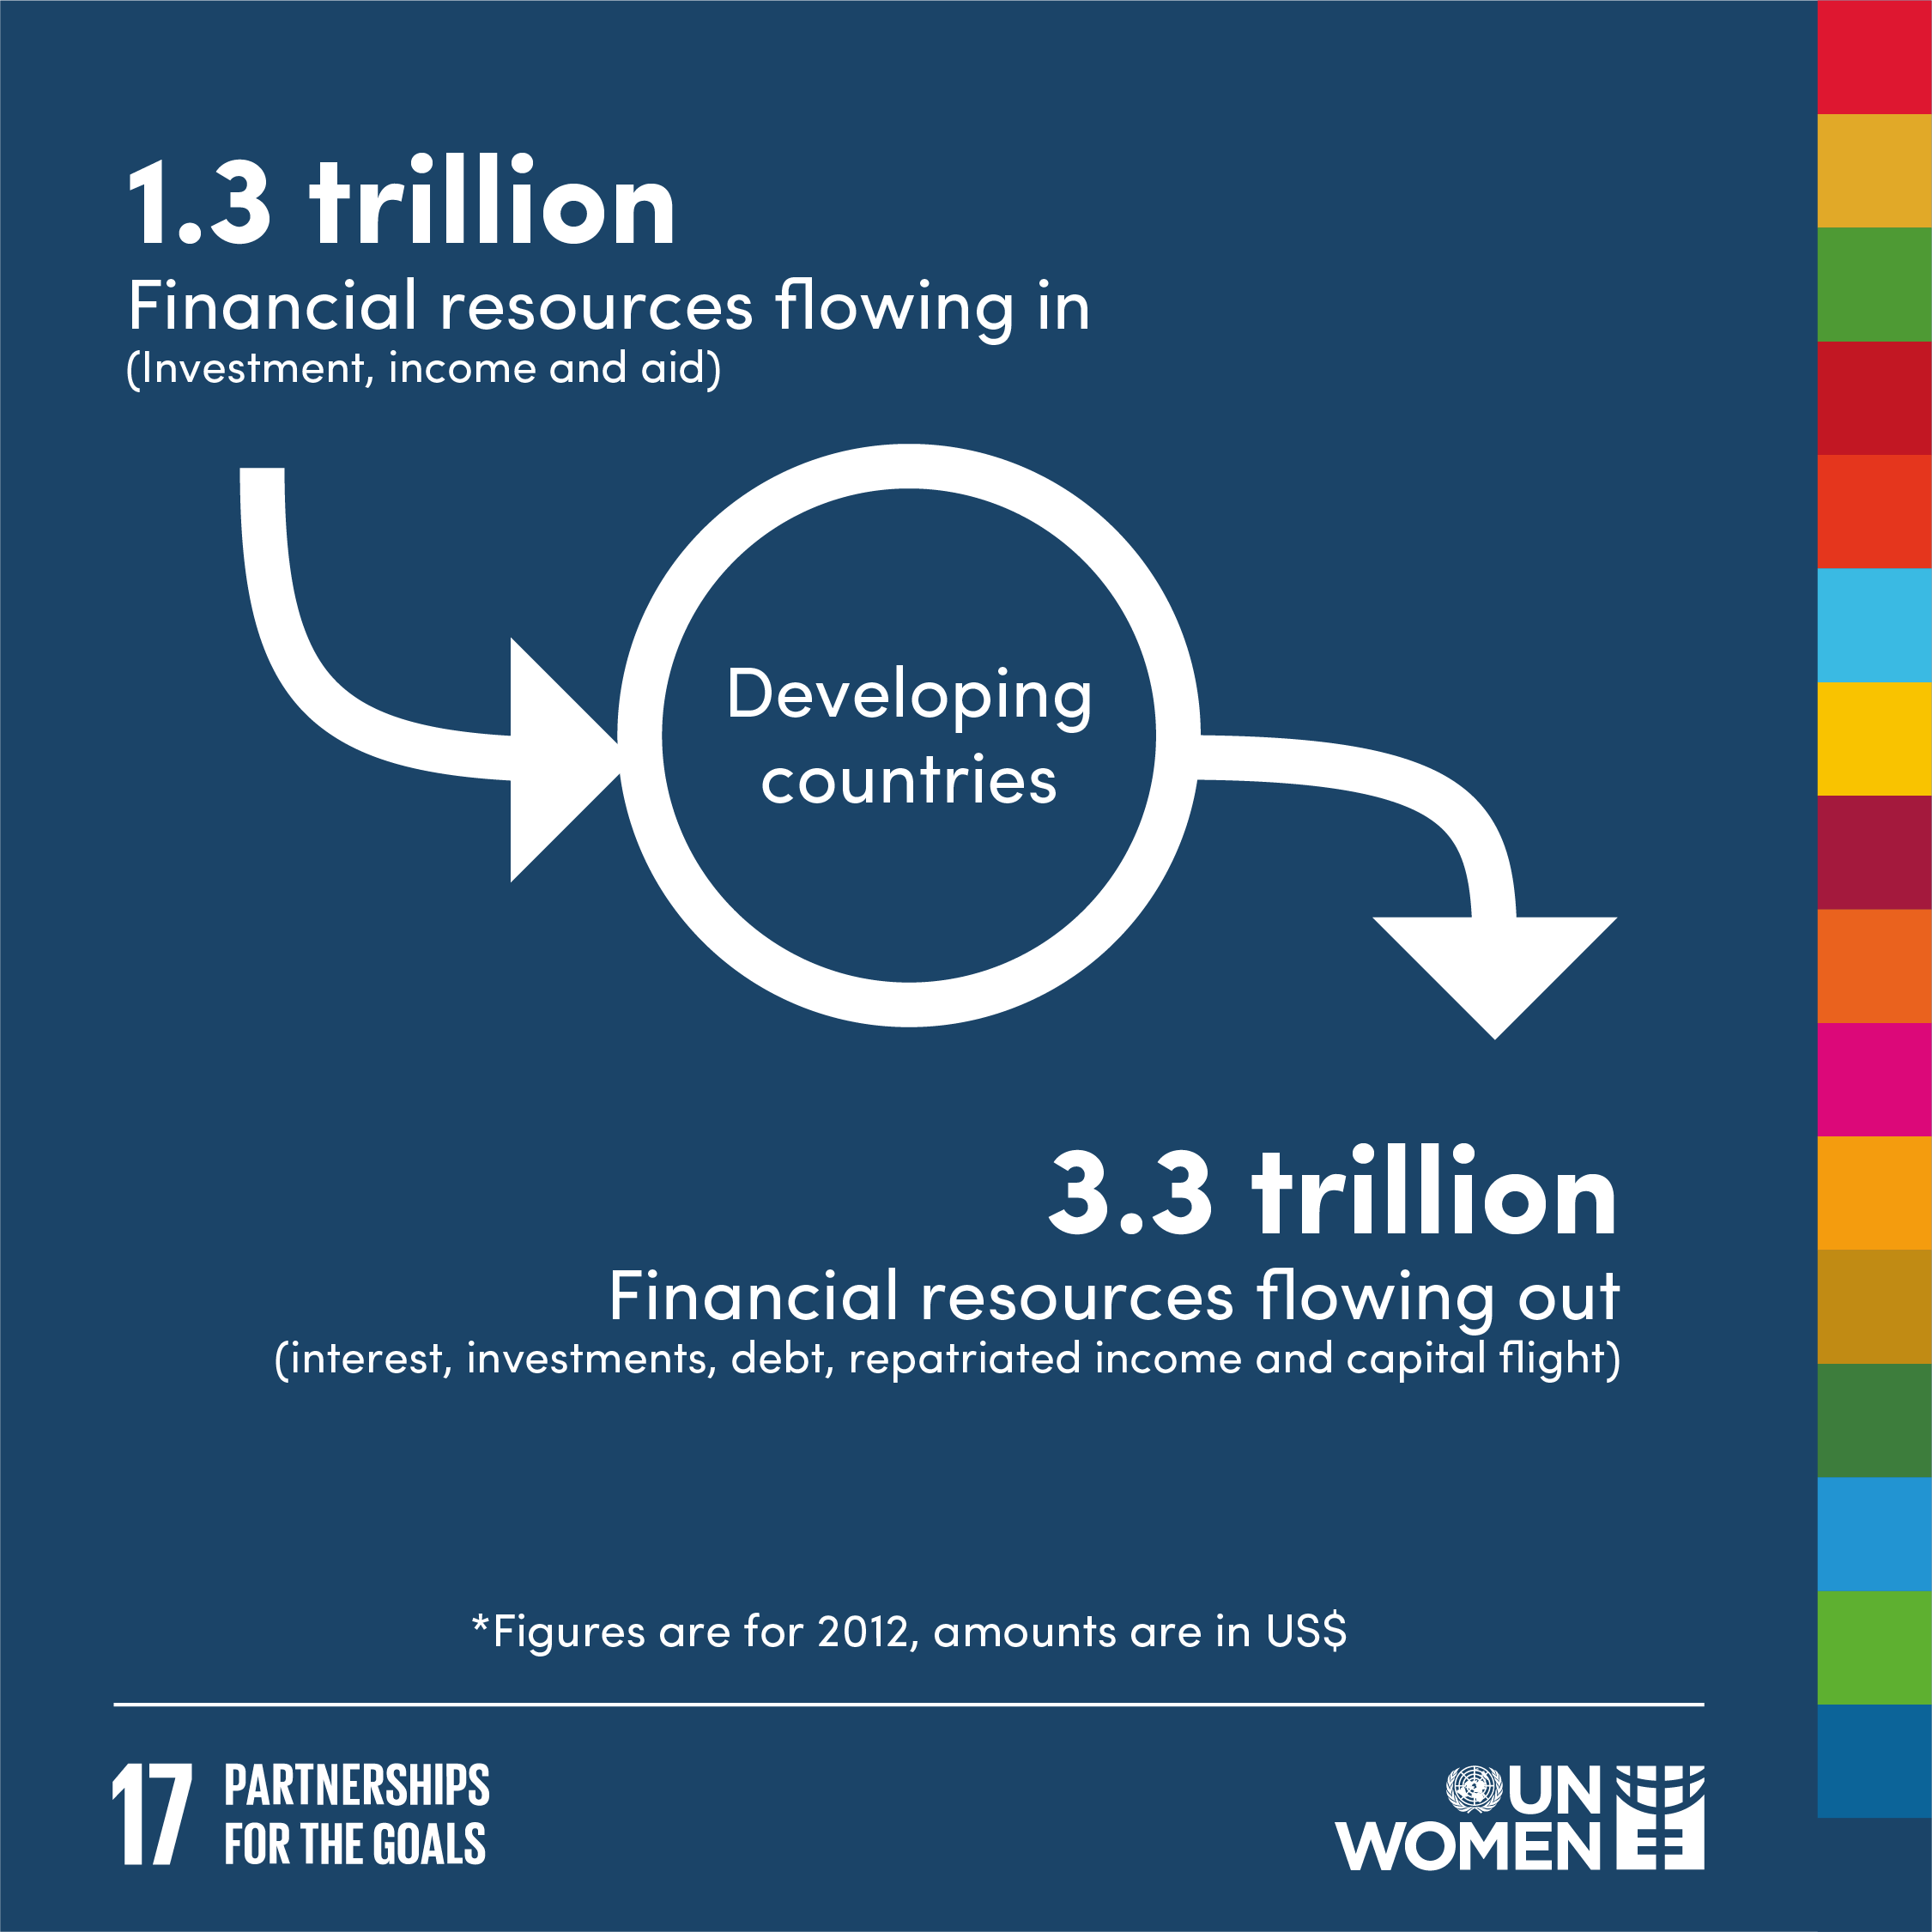 1.3  trillion financial resources flowing in to developing countries, and 3.3 trillion financial resources flowing out. 